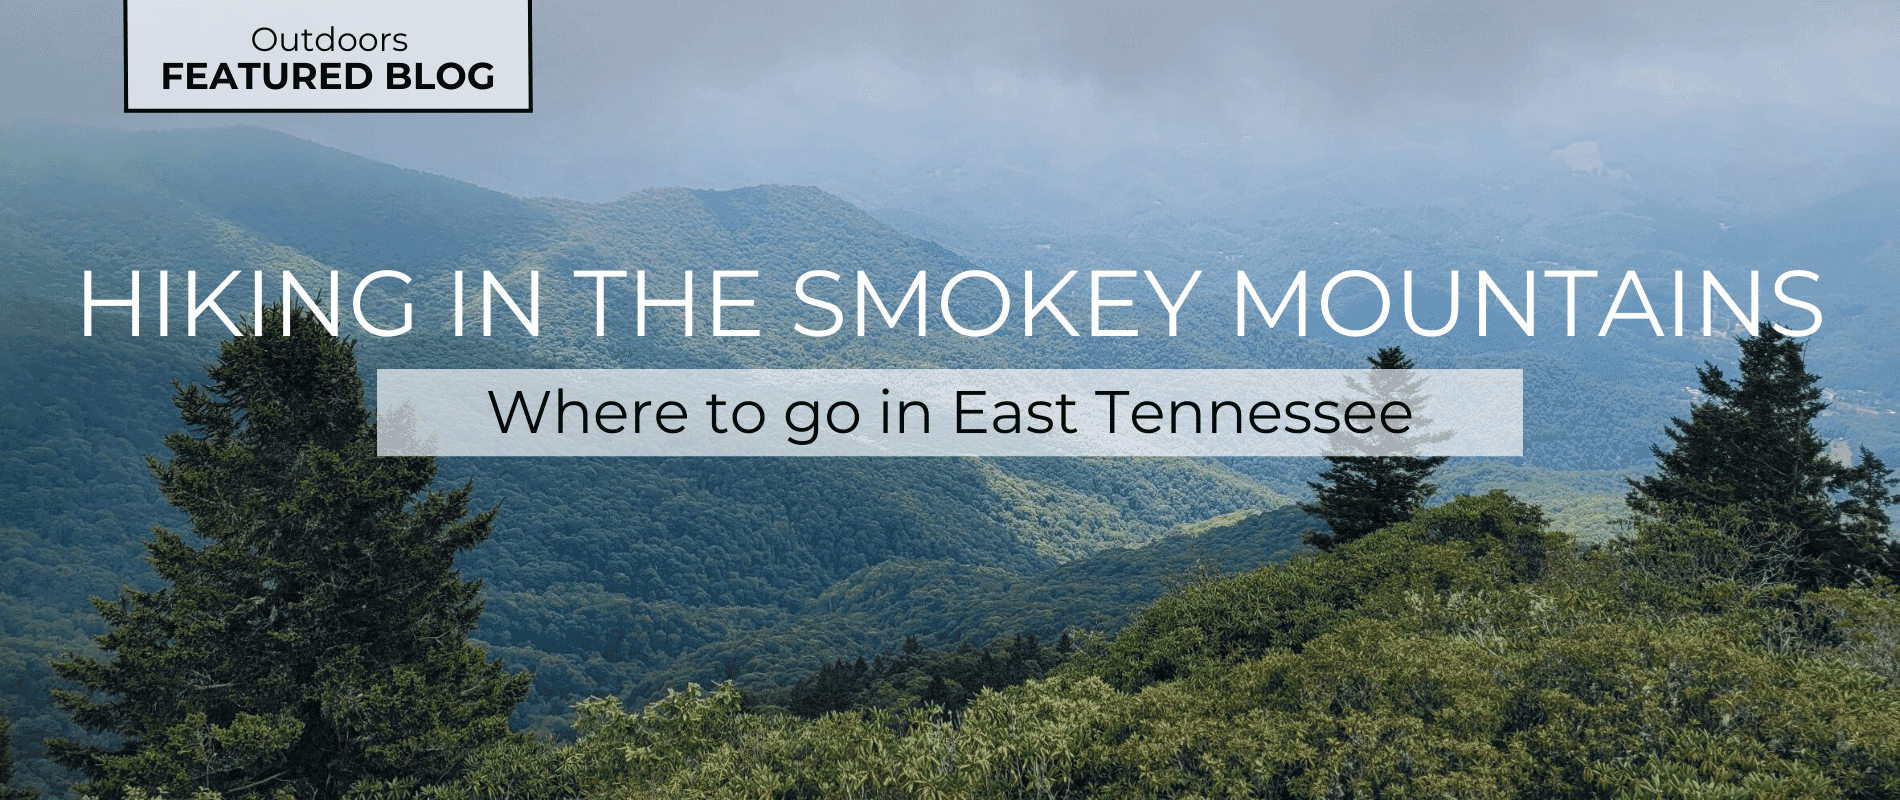 Hiking in the Great Smoky Mountains: Where to go hiking in East Tennessee. Explore the best trails to hike and walk near Gatlinburg.